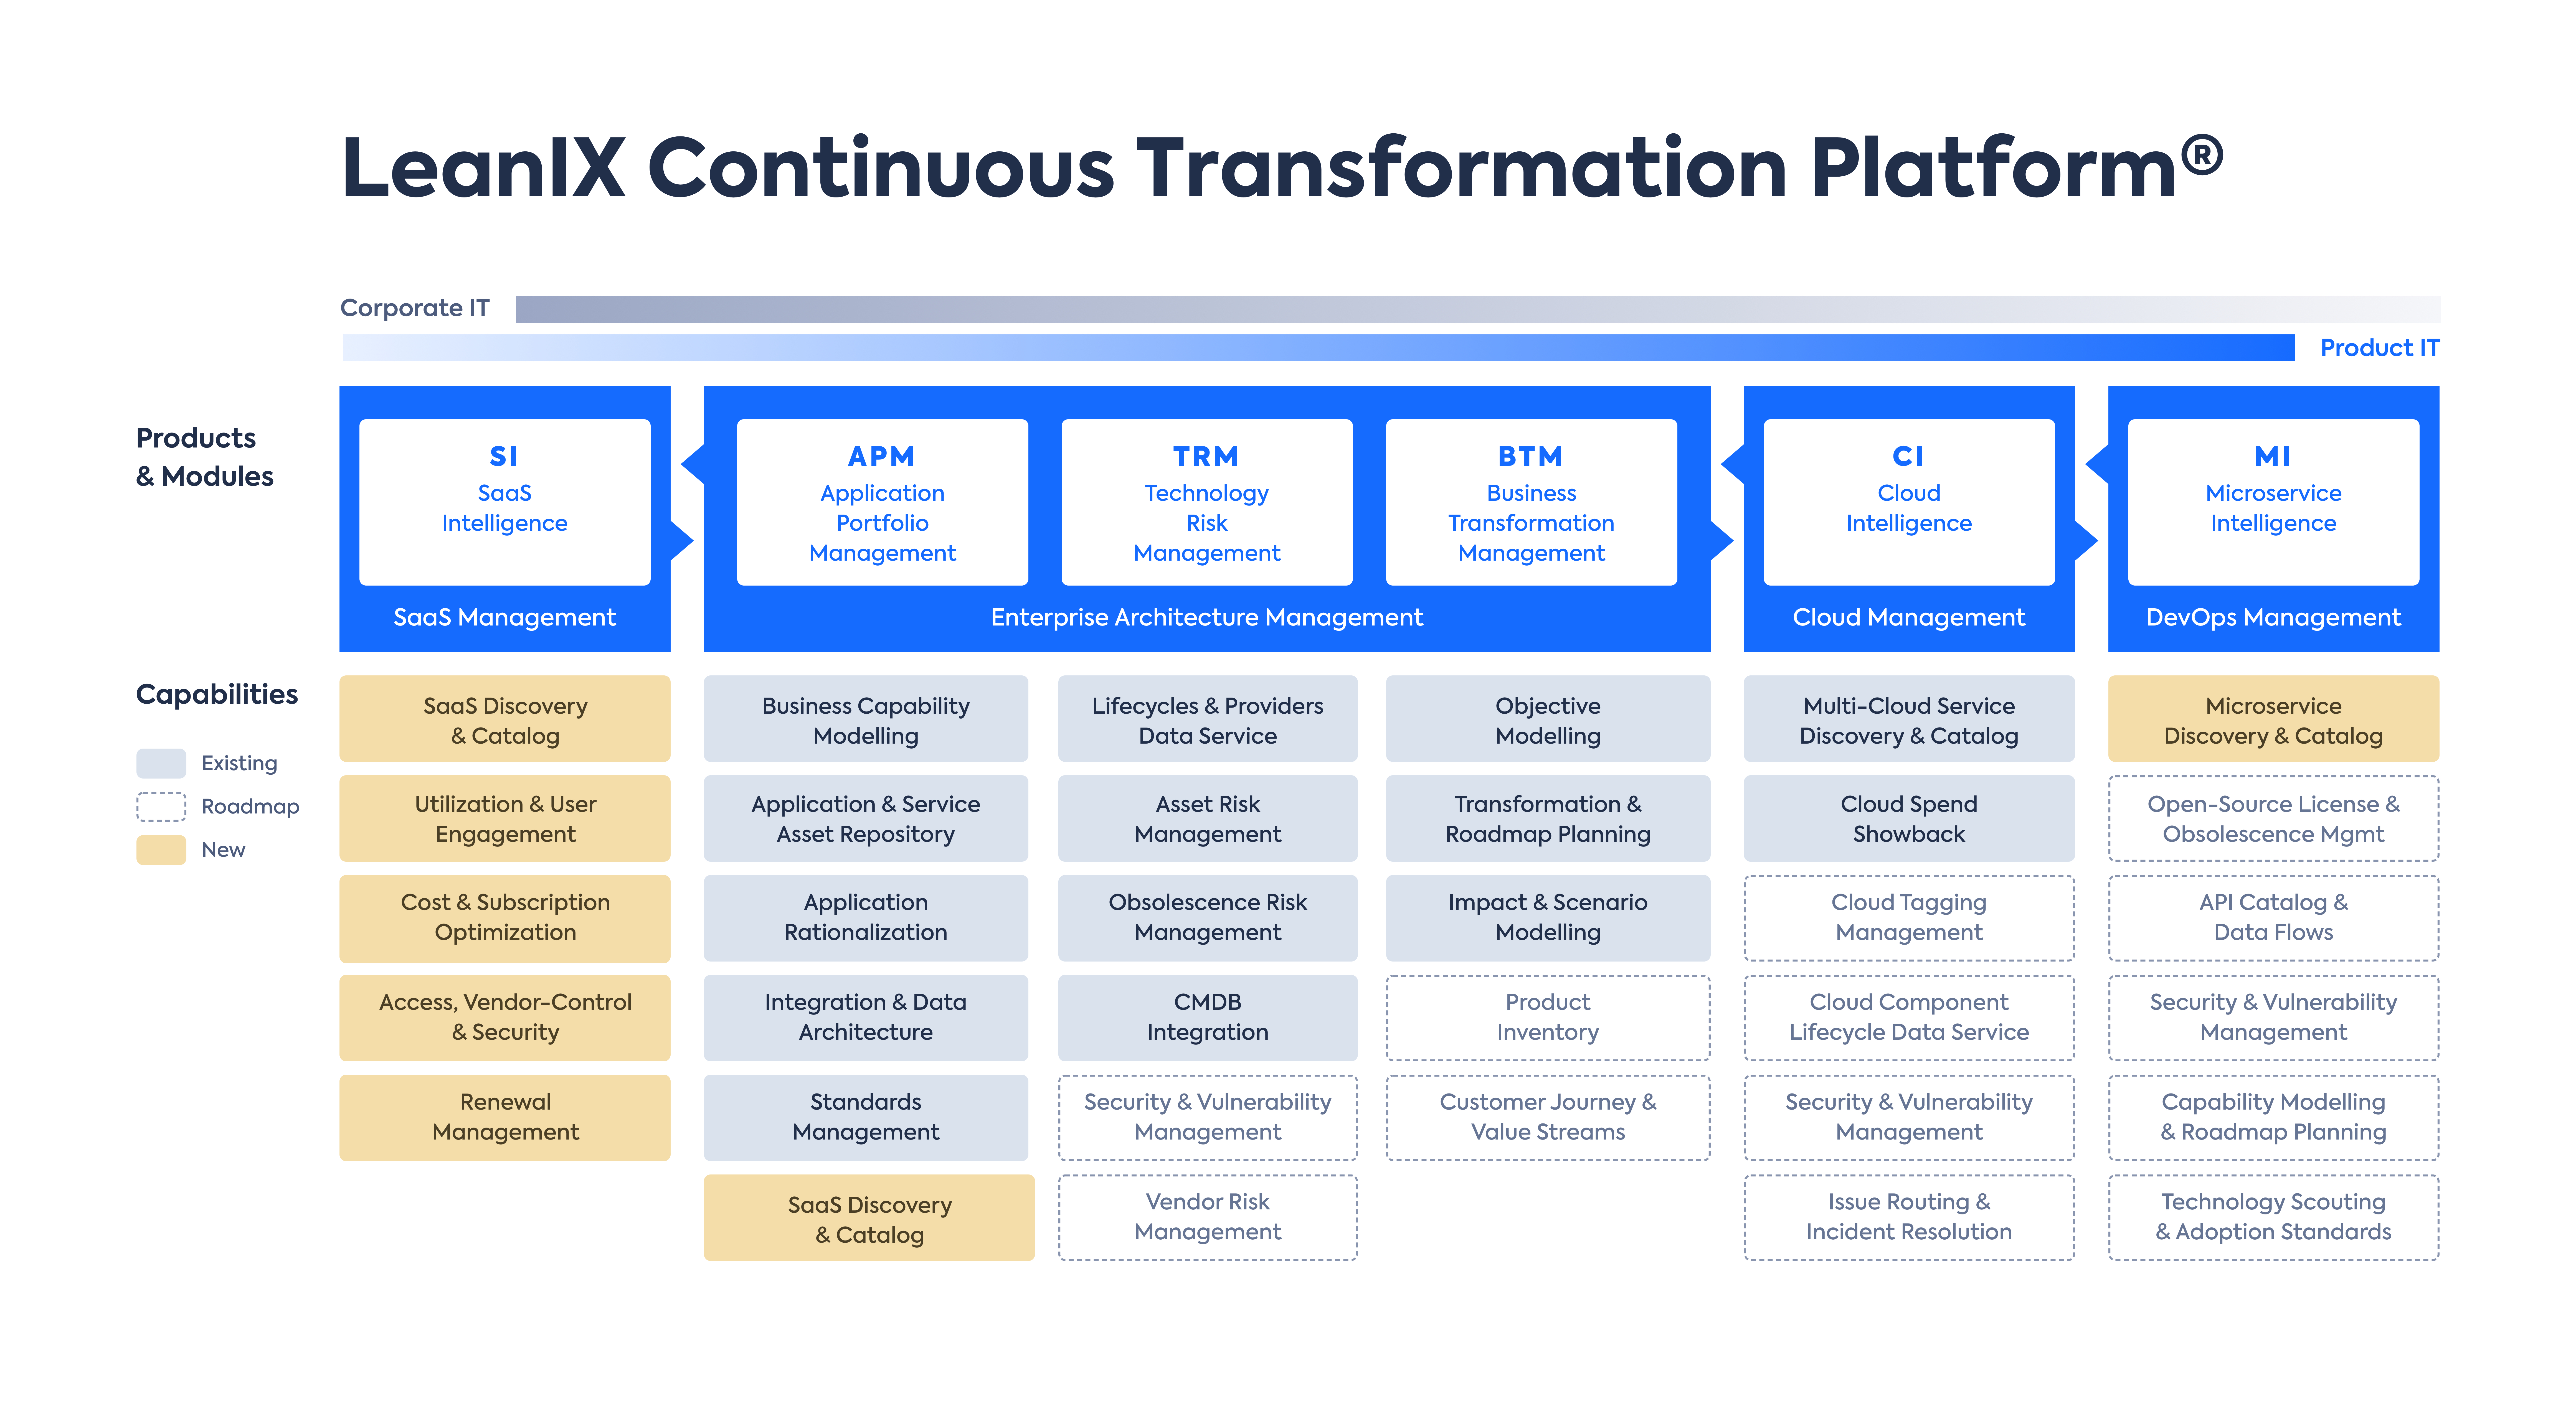 Overview of the LeanIX Continuous Transformation Platform